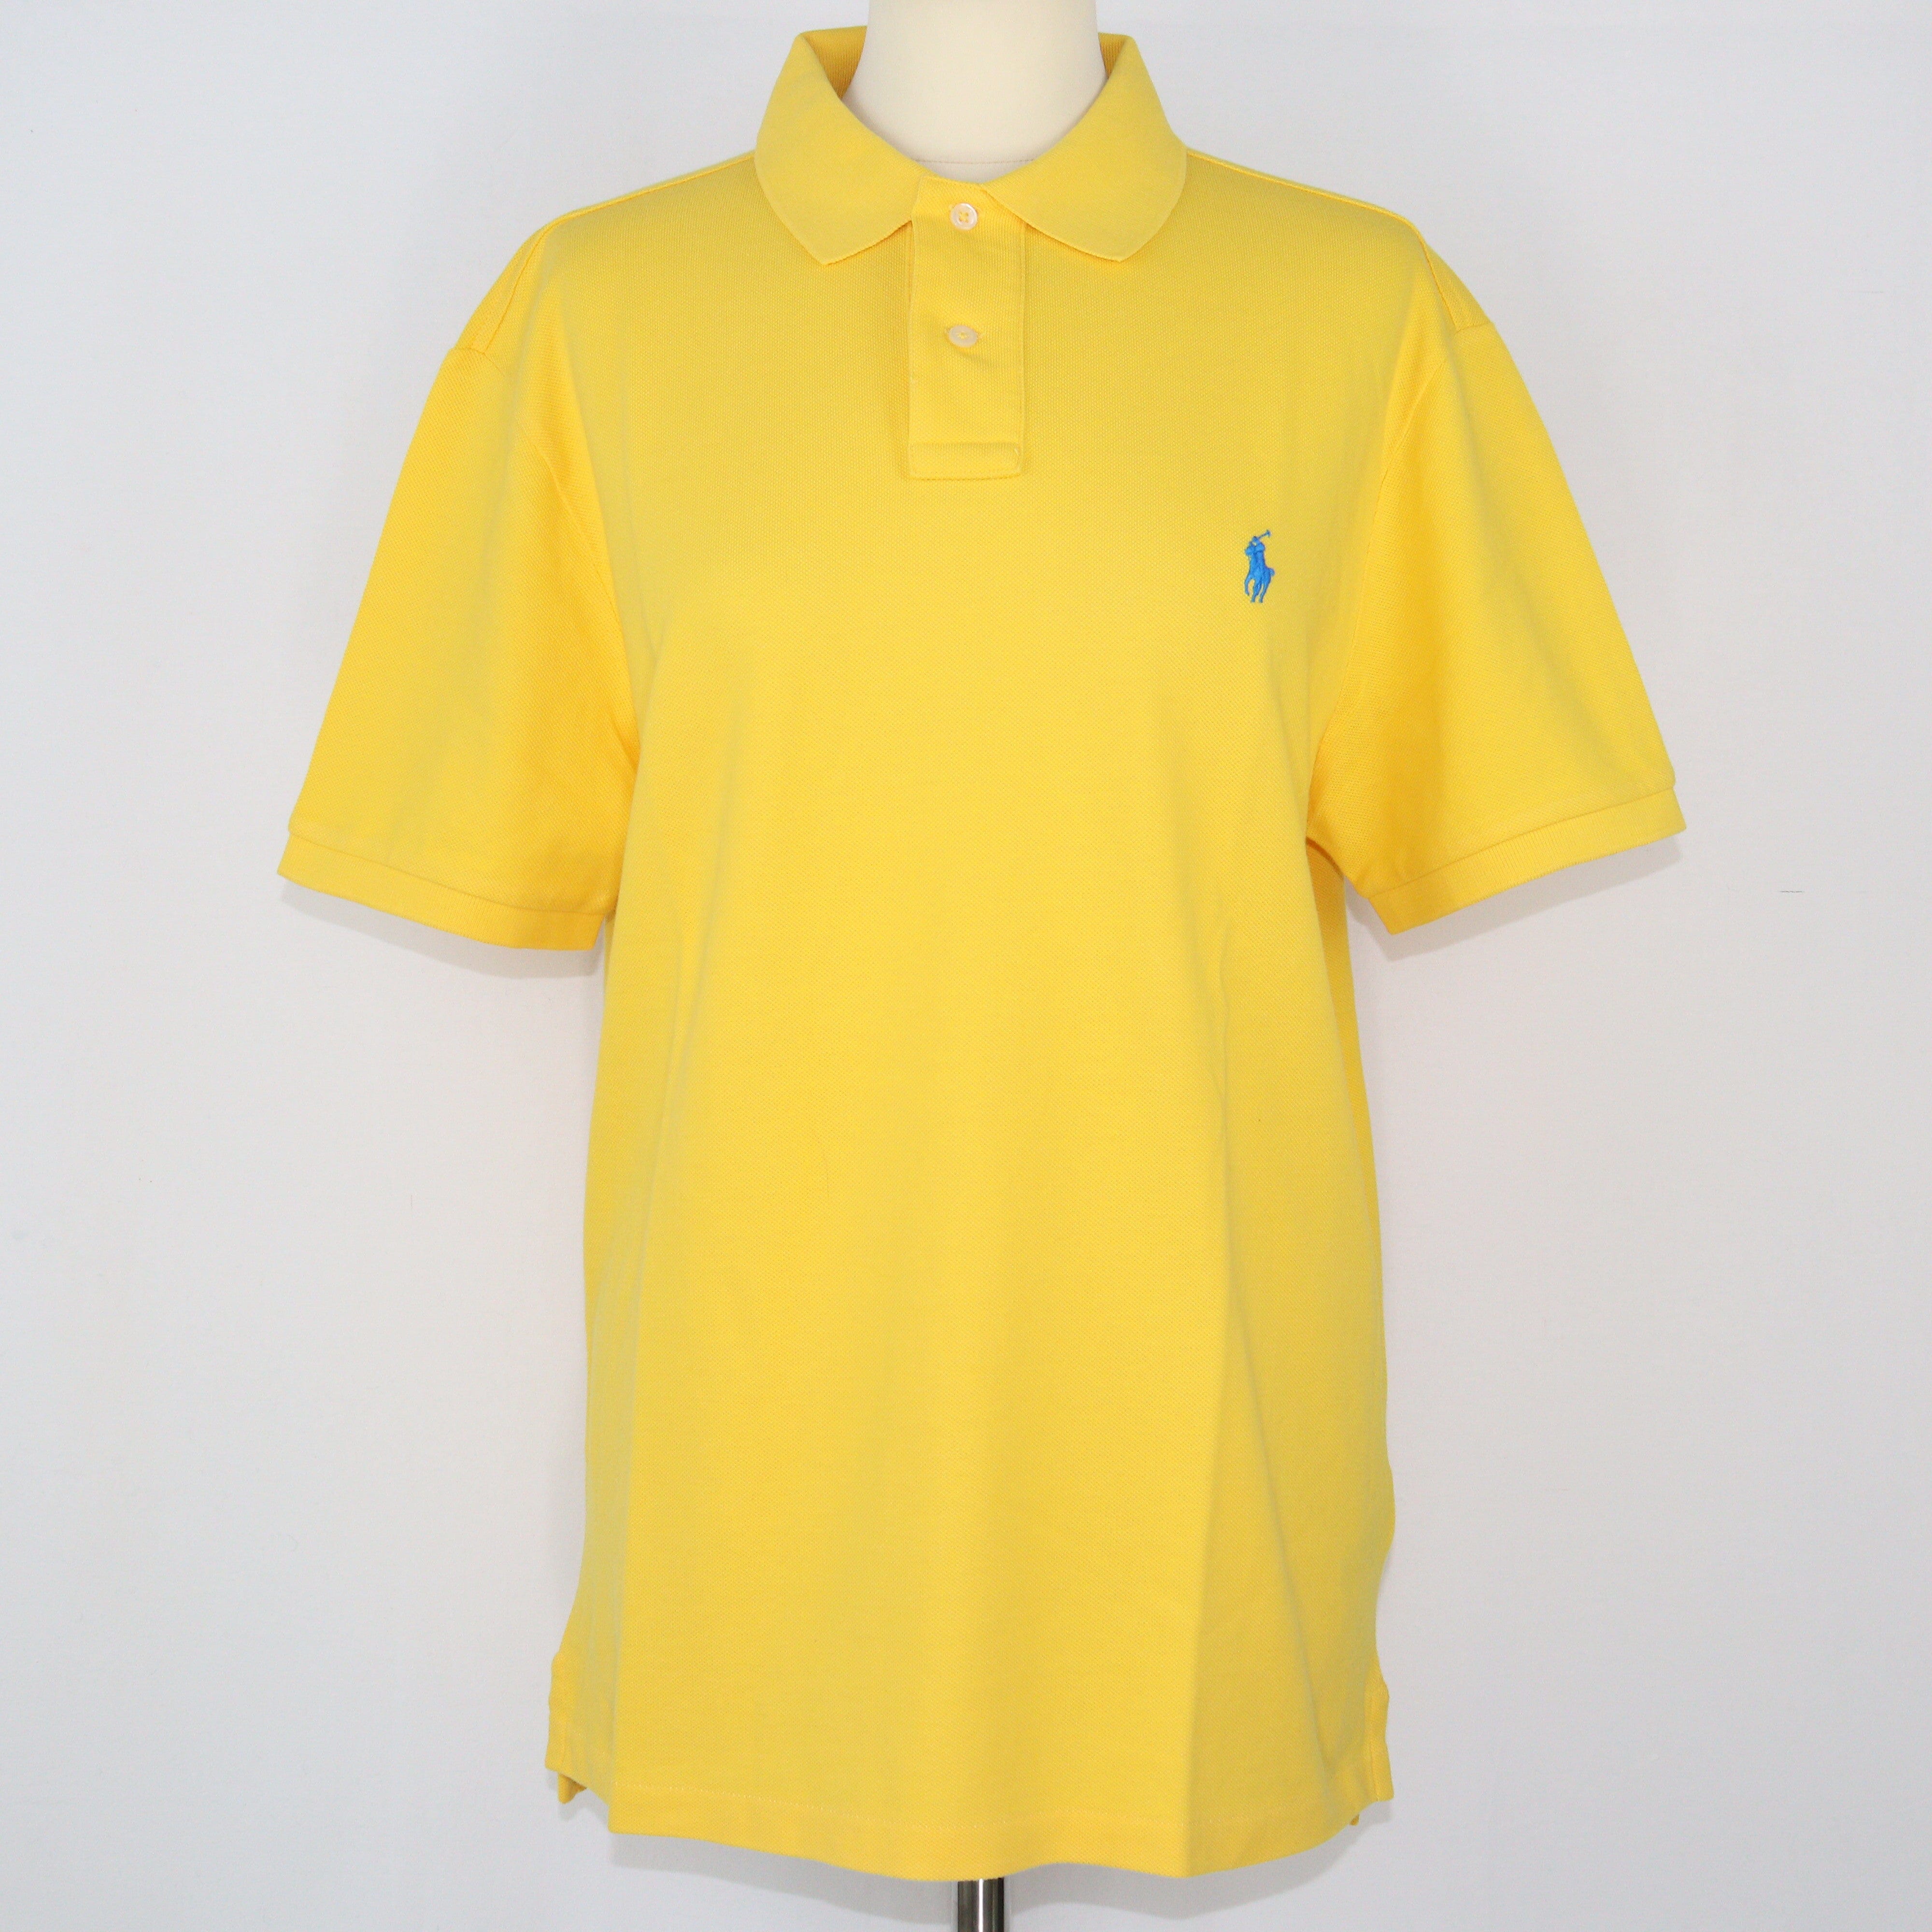 Yellow Pony Embroidered Polo Shirt Clothings Ralph Lauren 